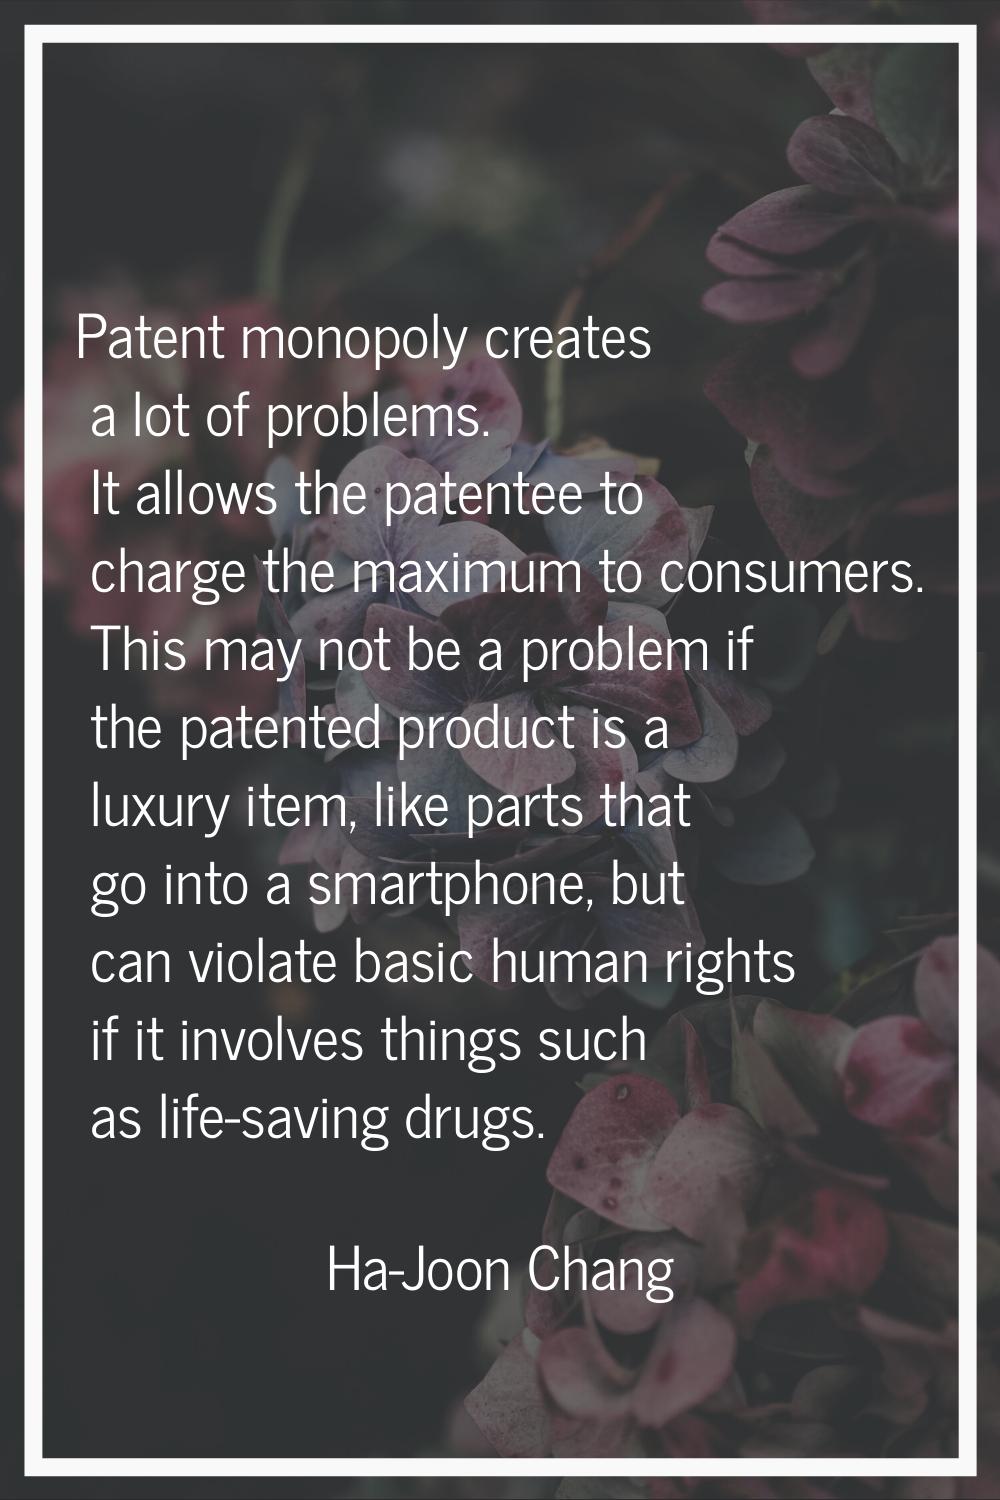 Patent monopoly creates a lot of problems. It allows the patentee to charge the maximum to consumer